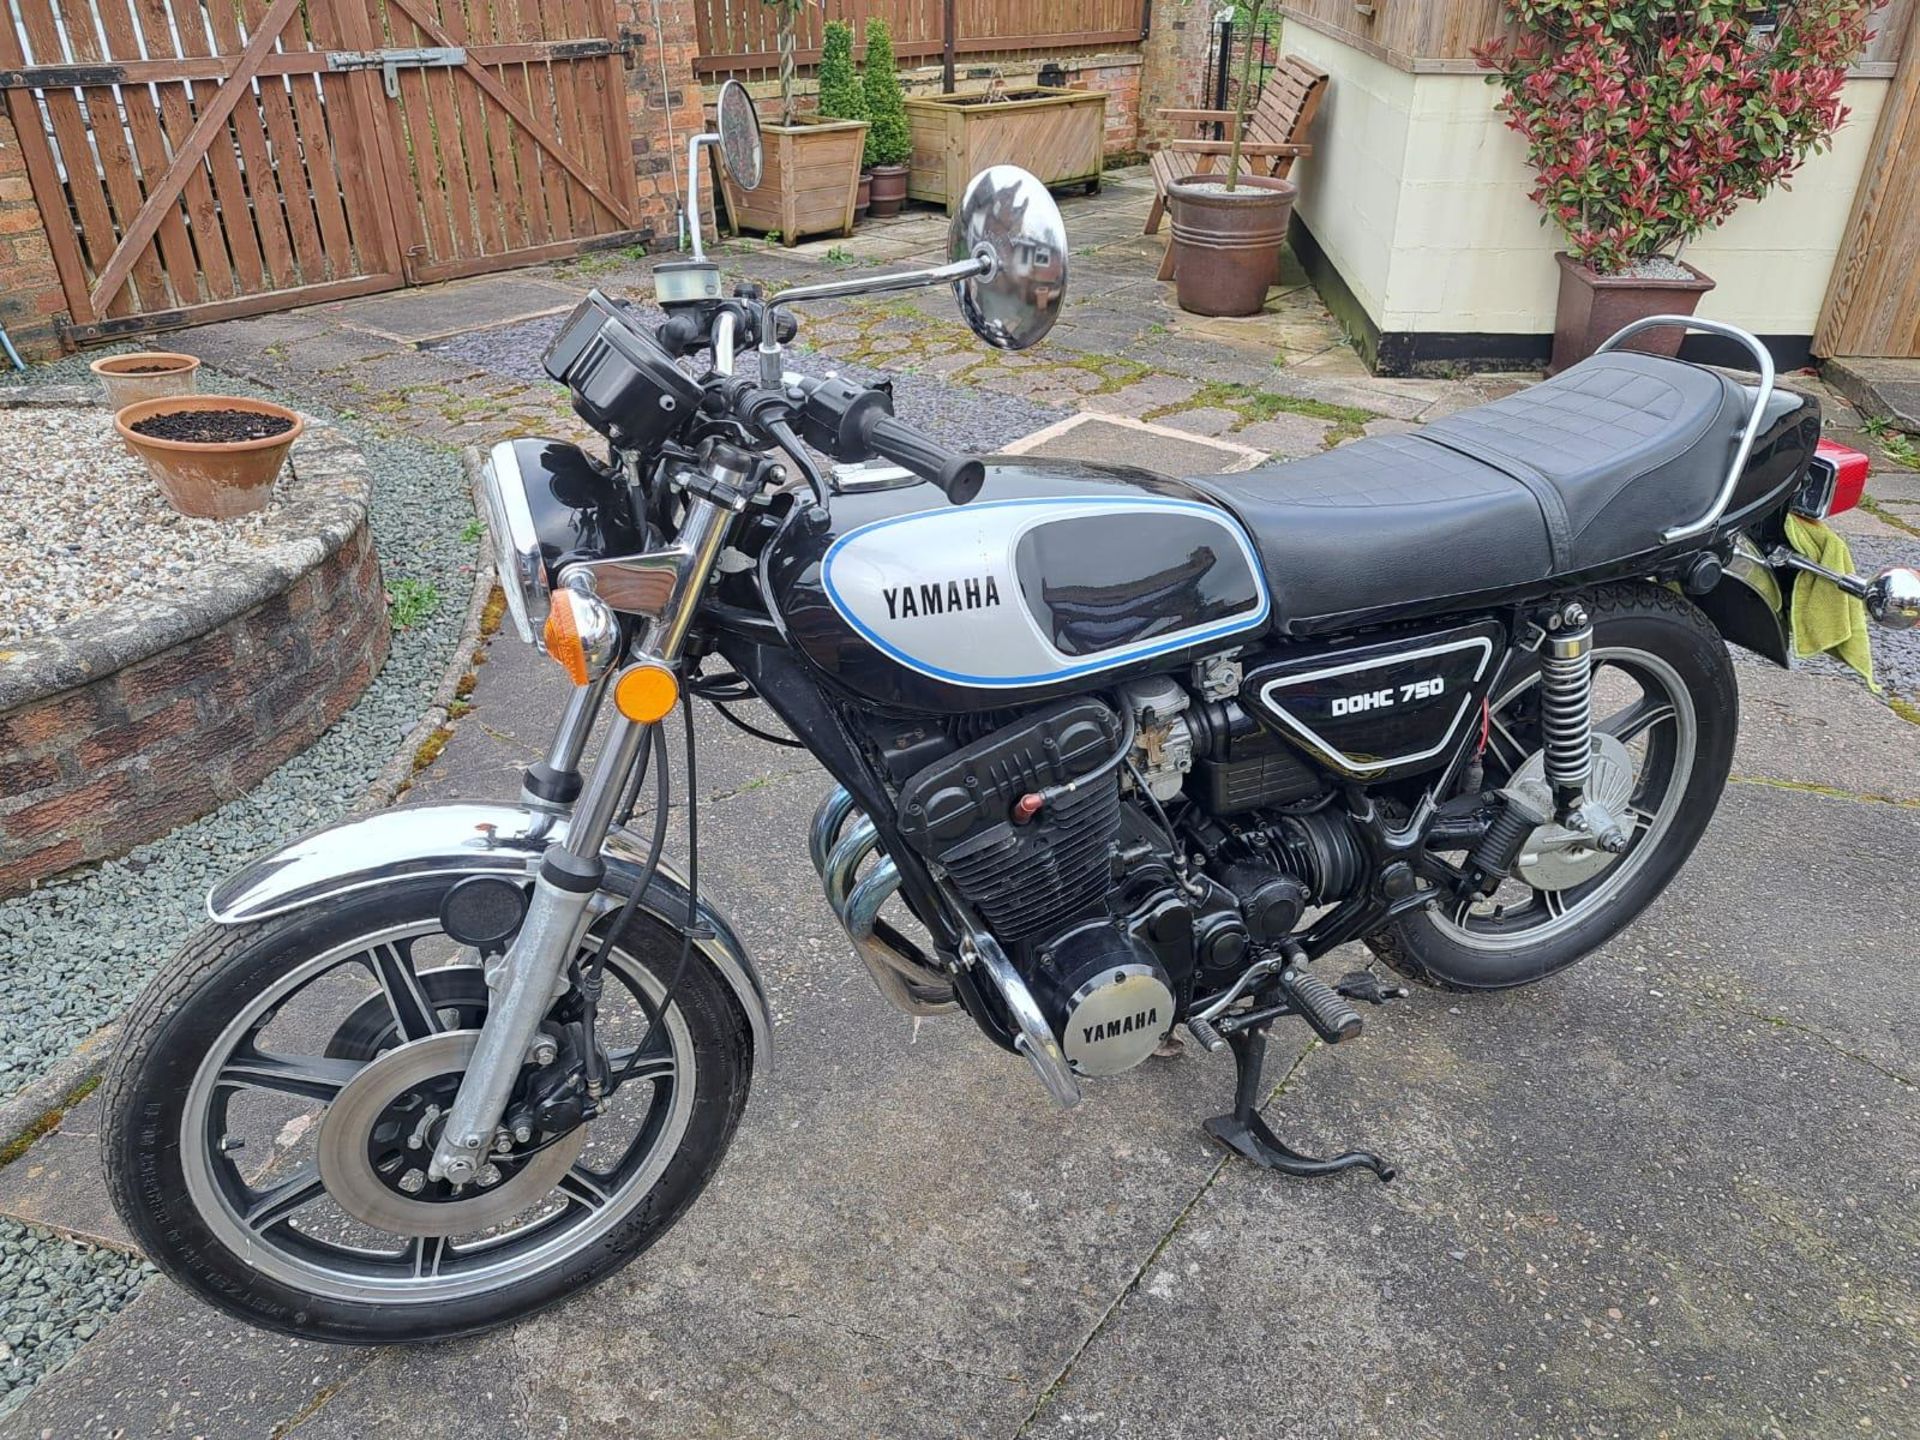 A 1978 YAMAHA XS 750 MOTORCYCLE, MILEAGE AT CATALOGING ONLY 8542, TWO OWNERS - ON A V5C, VENDOR